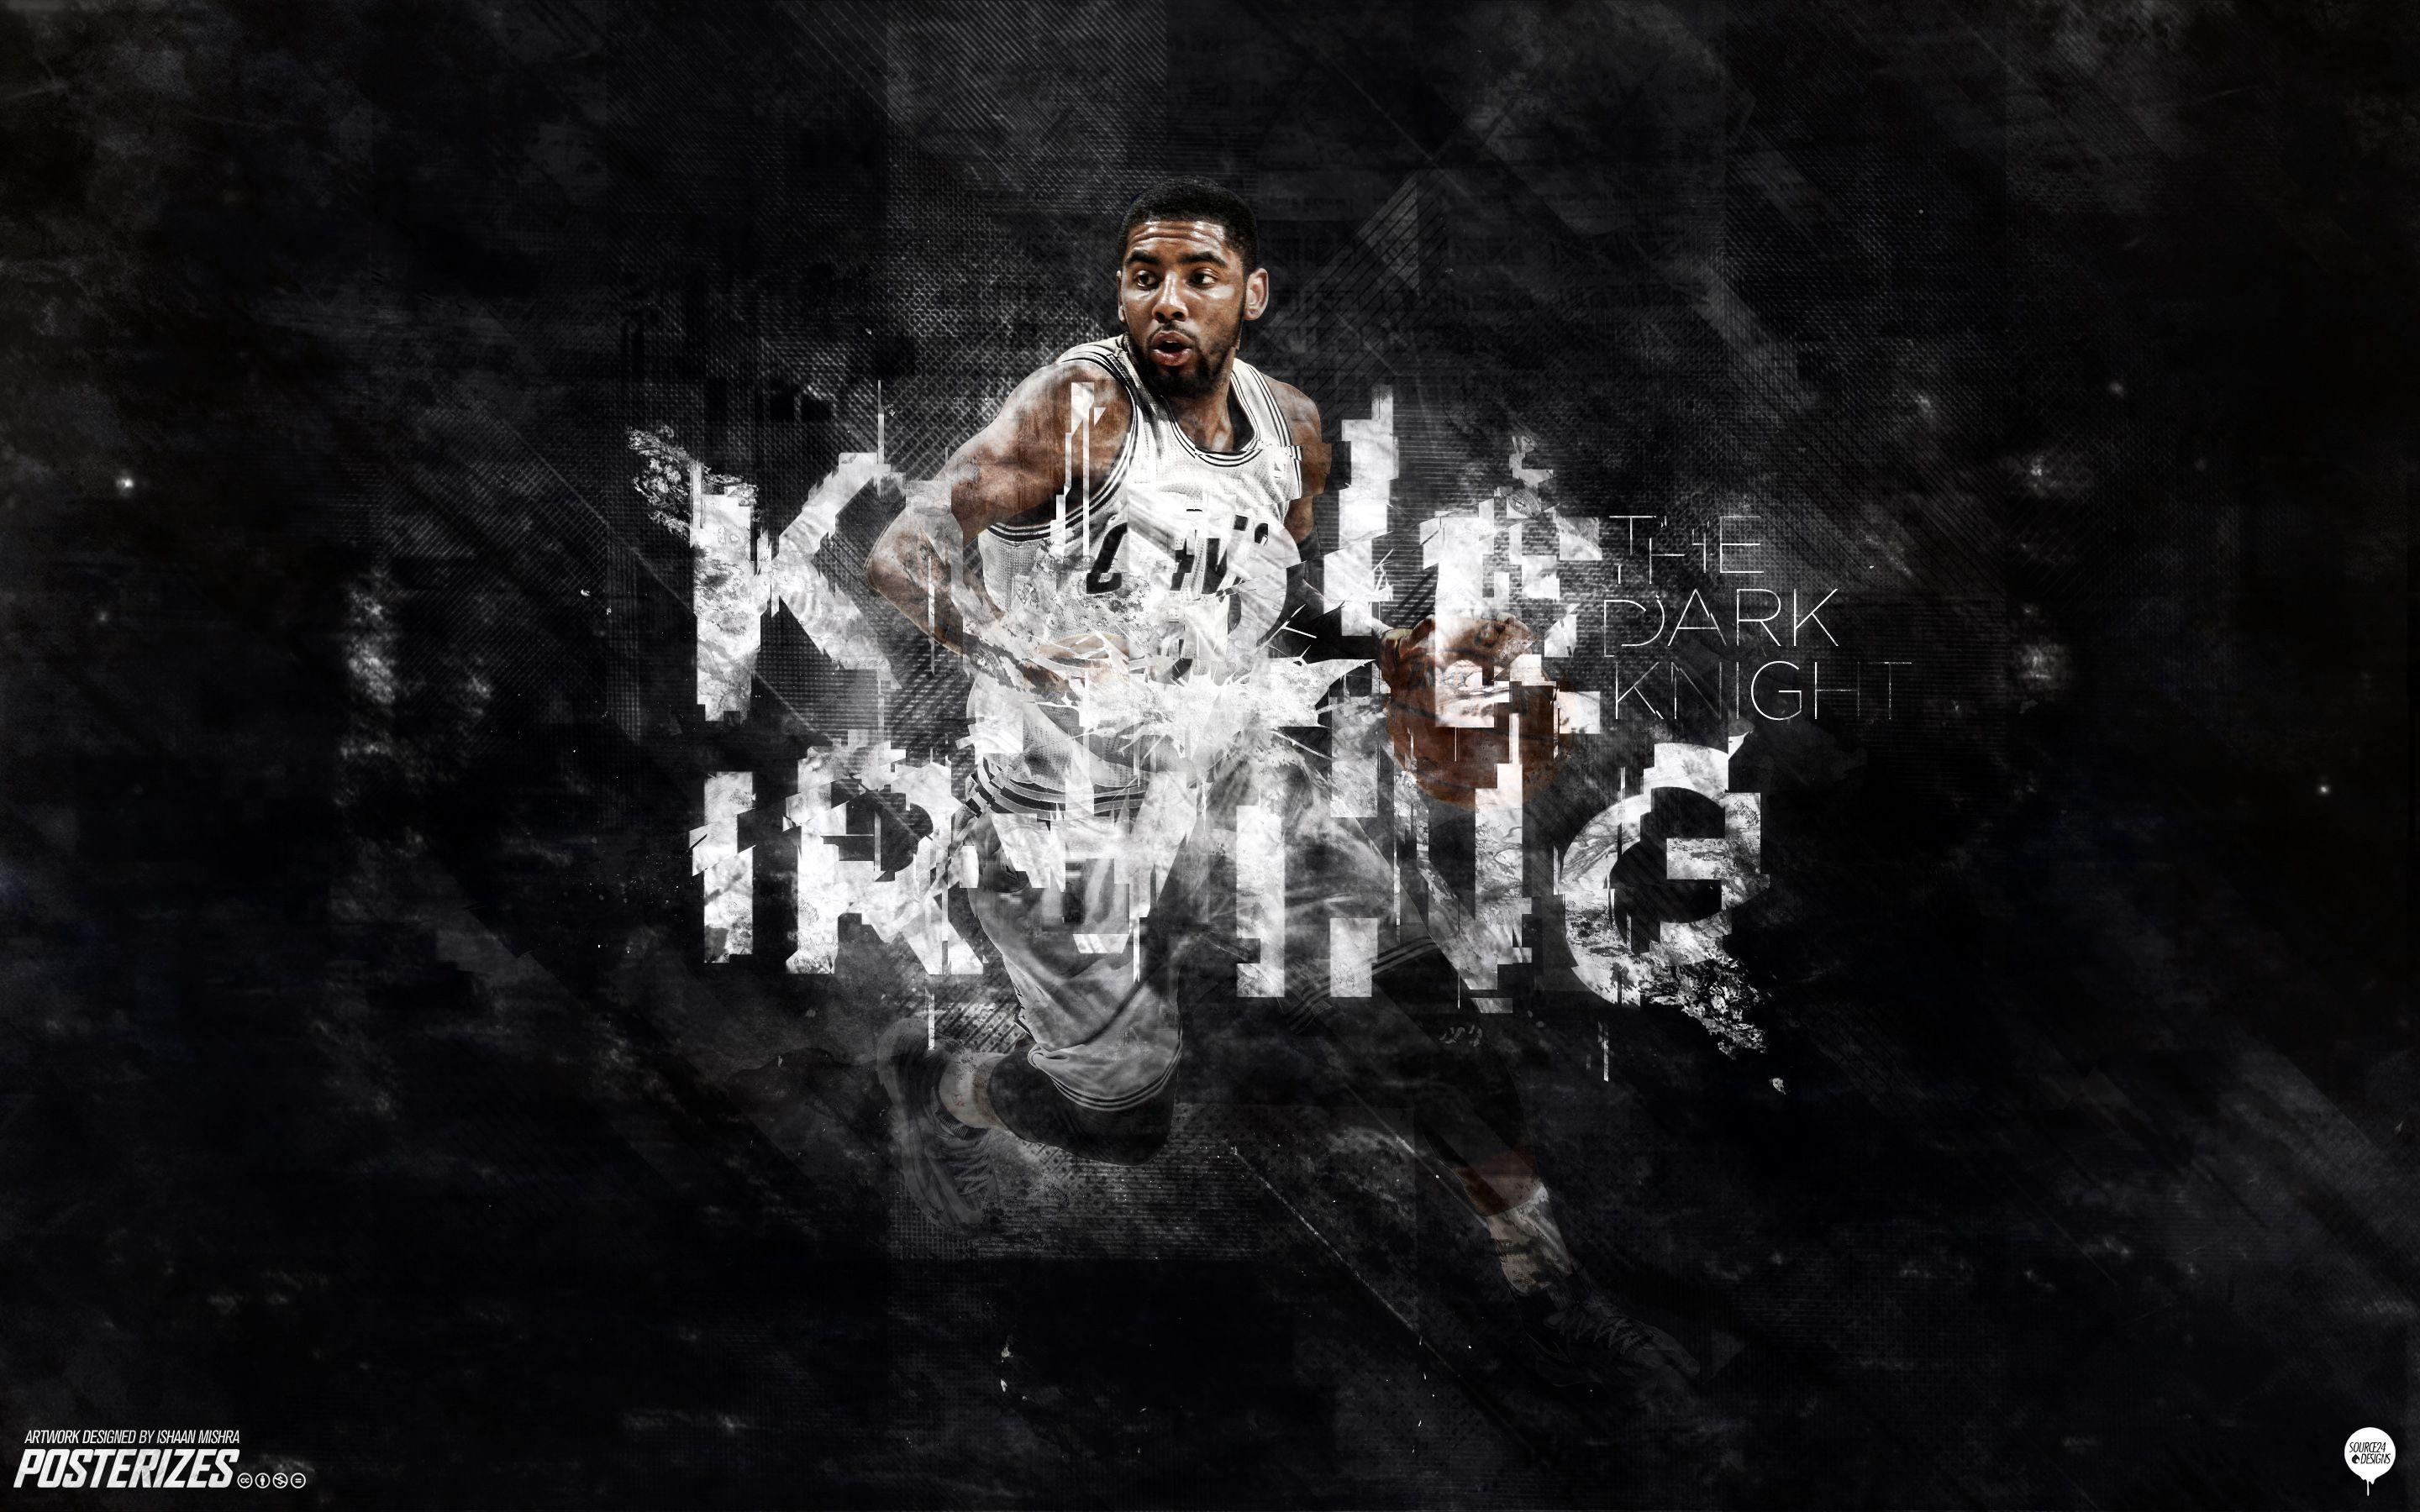 Download Kyrie Irving Cleveland Cavaliers Wallpaper